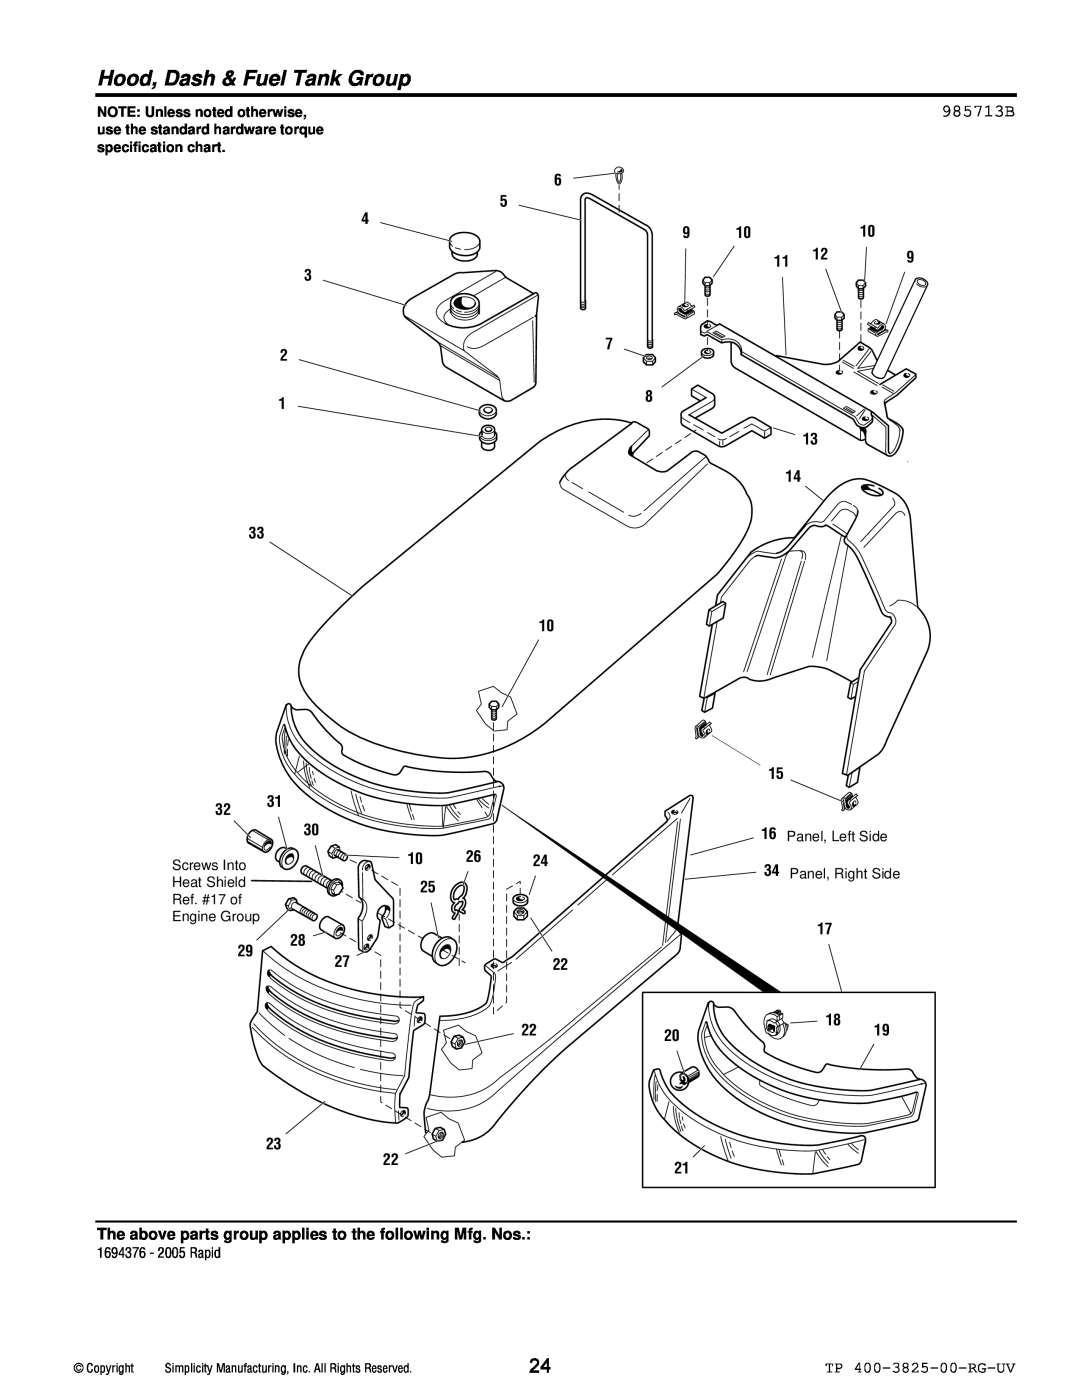 Simplicity 1694377, 1694376 Hood, Dash & Fuel Tank Group, 985713B, The above parts group applies to the following Mfg. Nos 